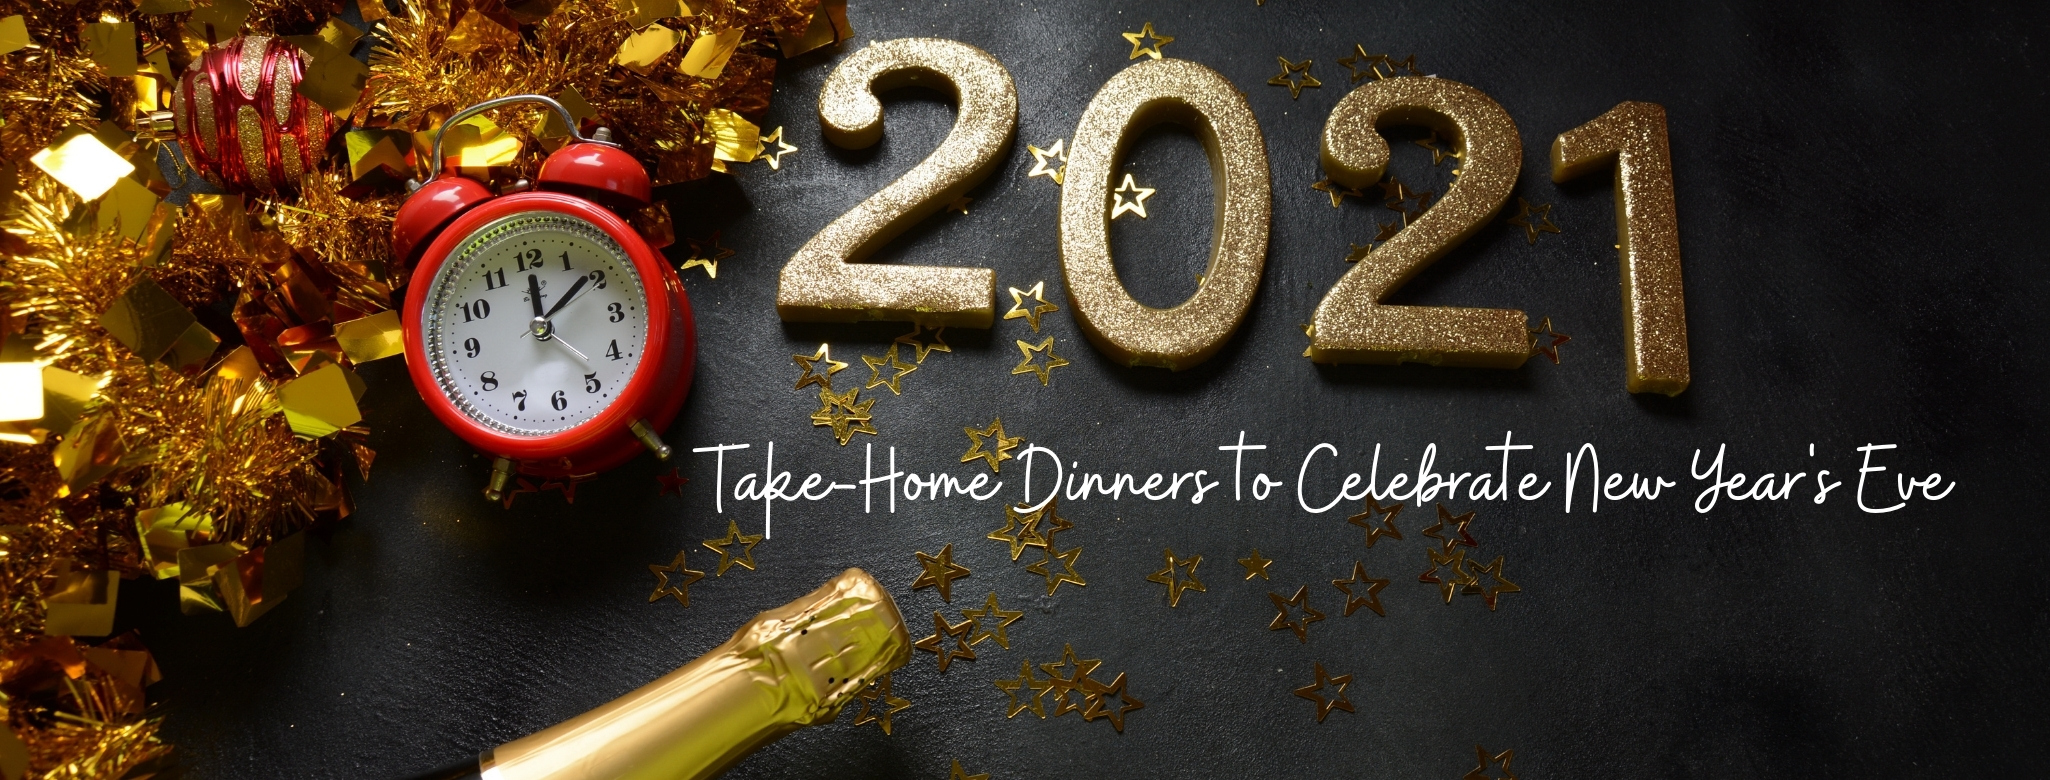 Take-Home Dinners to Celebrate New Year's Eve 2021